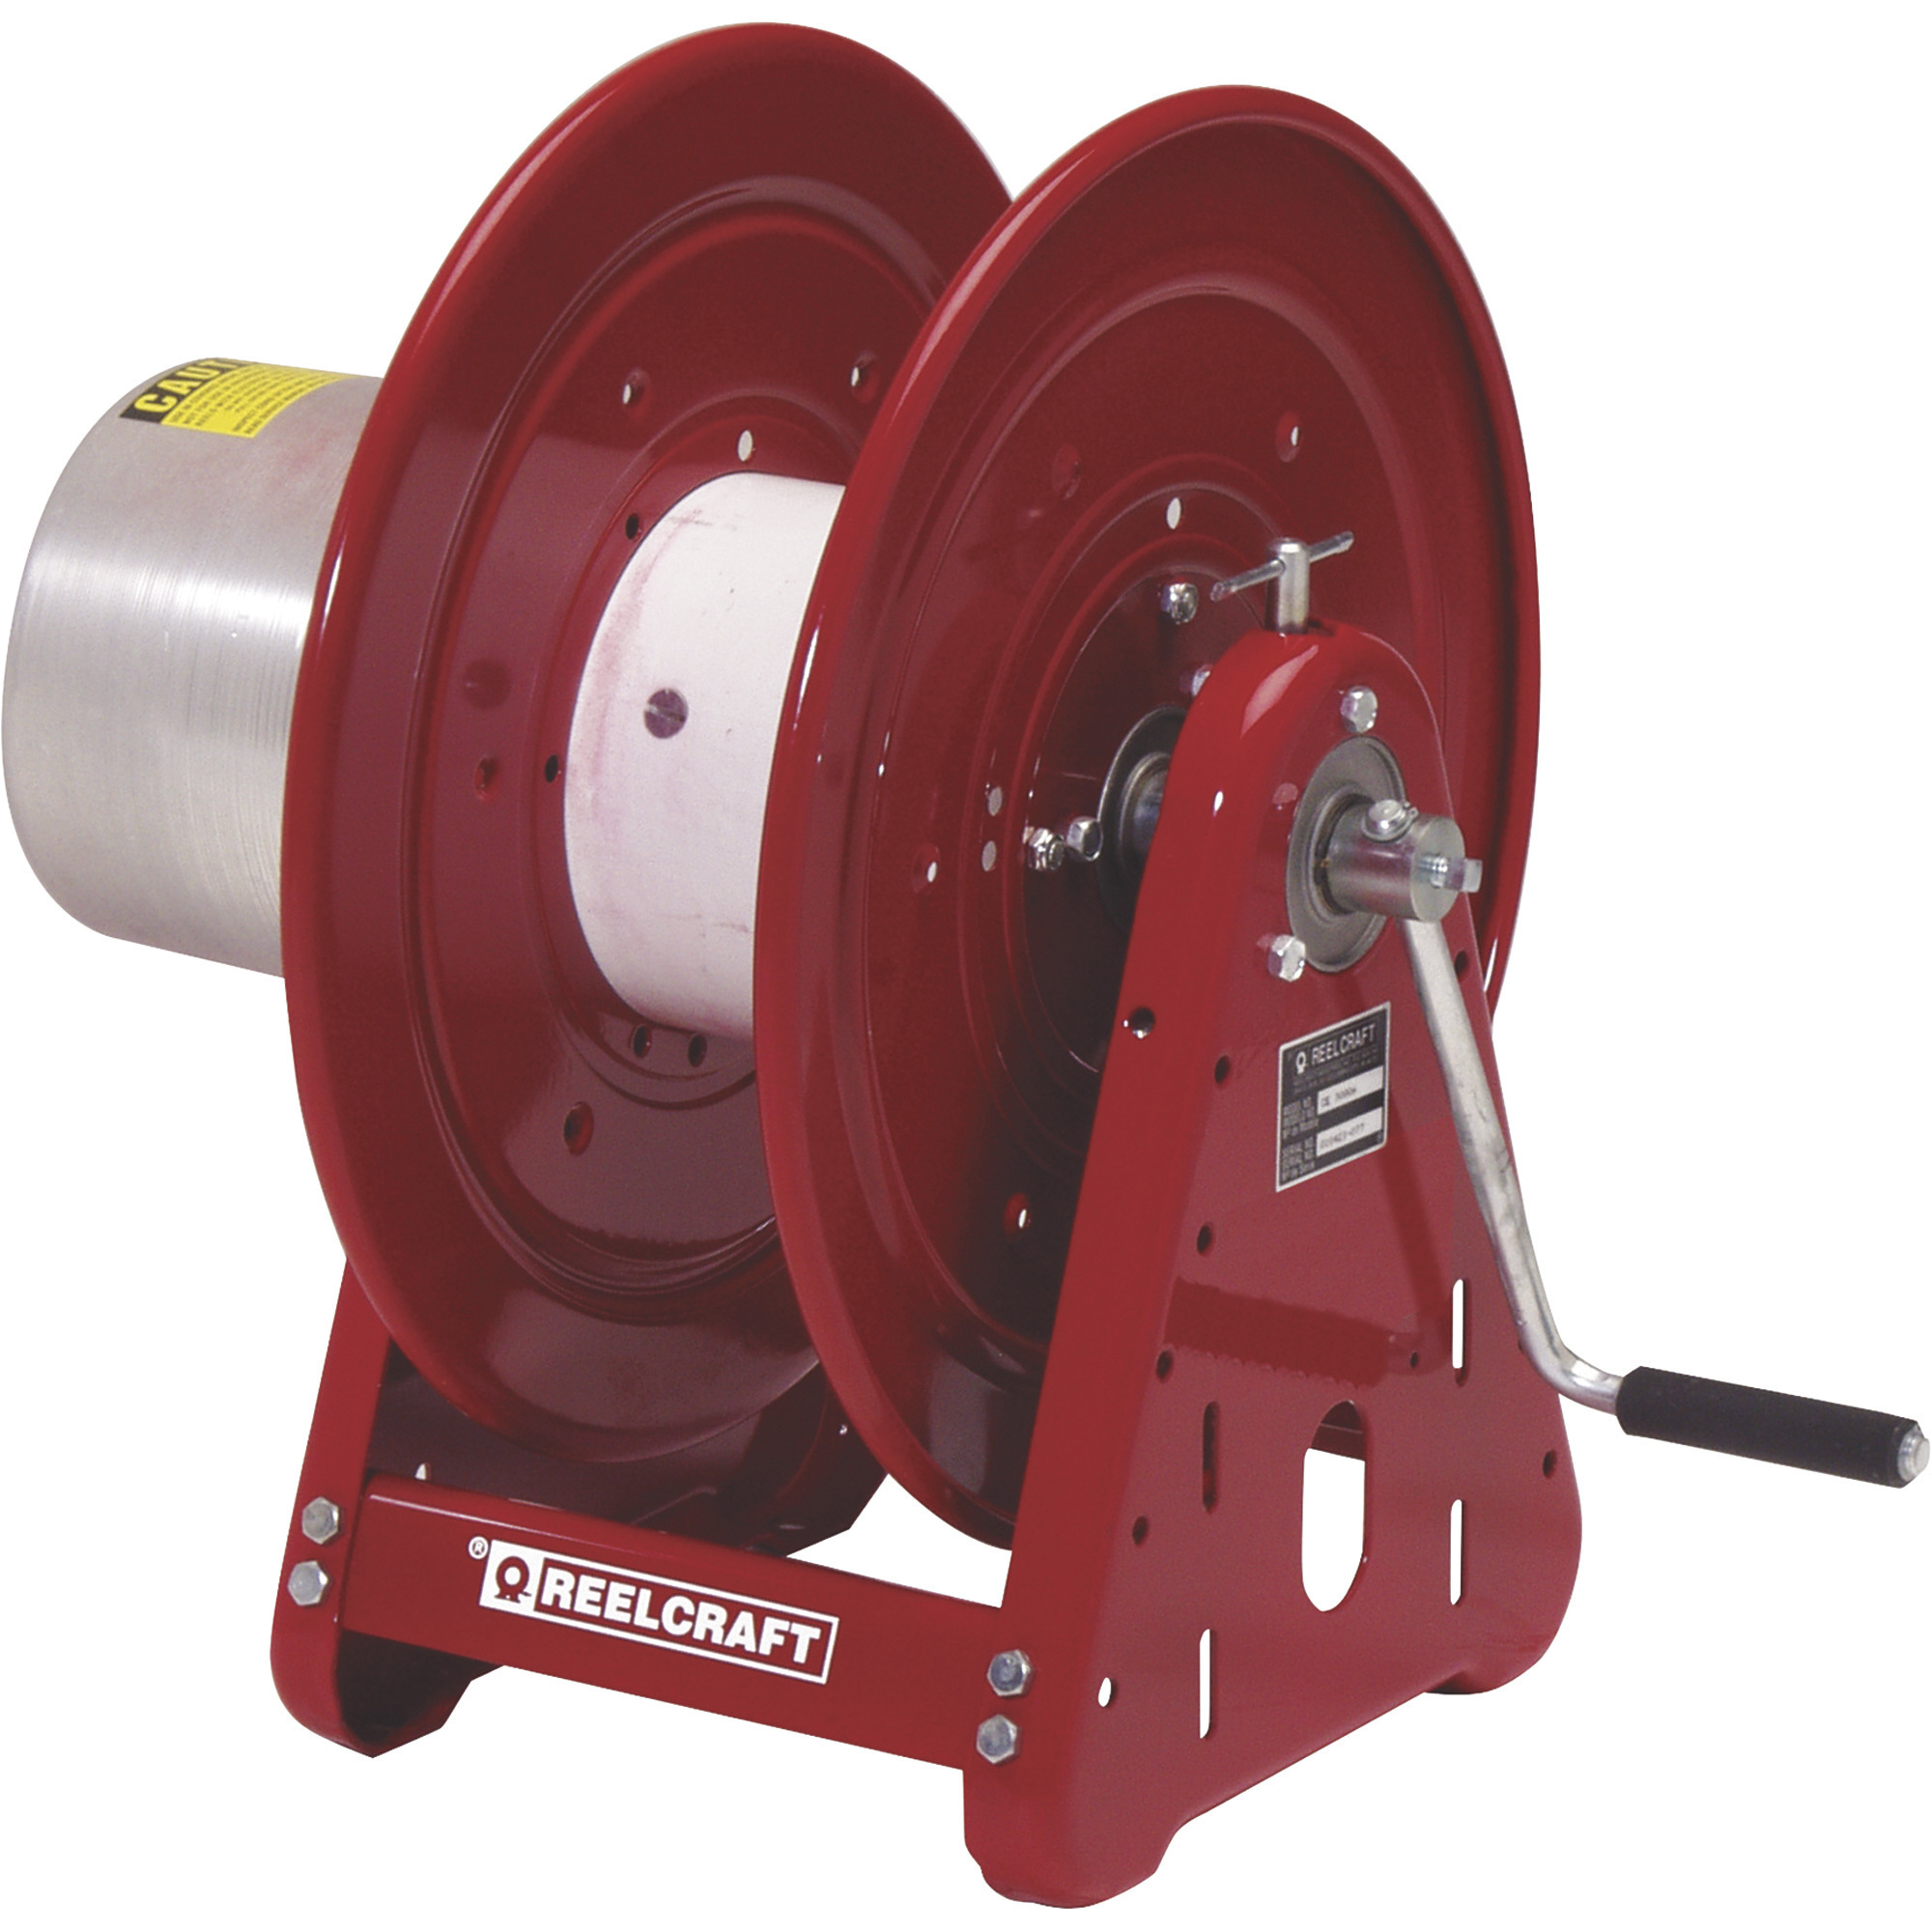 Reelcraft Heavy-Duty Hand Crank Cable Welding Reel — 300ft